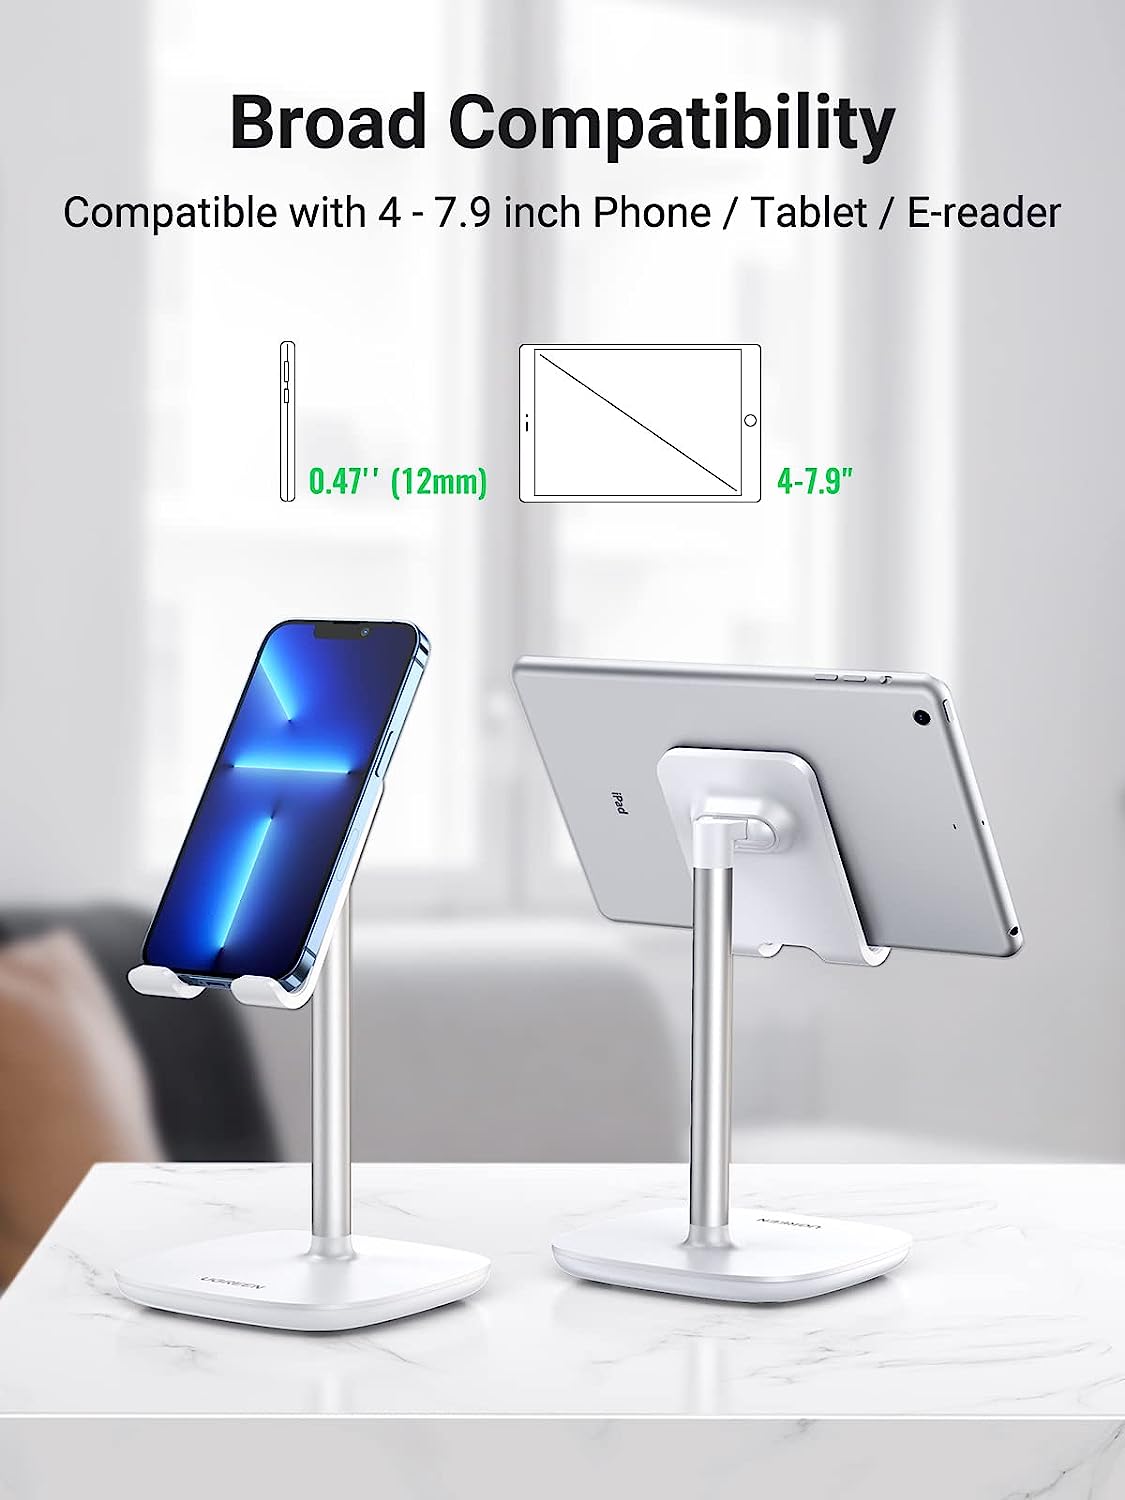 UGREEN Cell Phone Stand Desk Holder Compatible for Samsung Galaxy S20 S10 S9 S8 Note 9 8 S7 S6, Google Pixel 4 XL, LG V40 V30 G7 Smartphone Adjustable